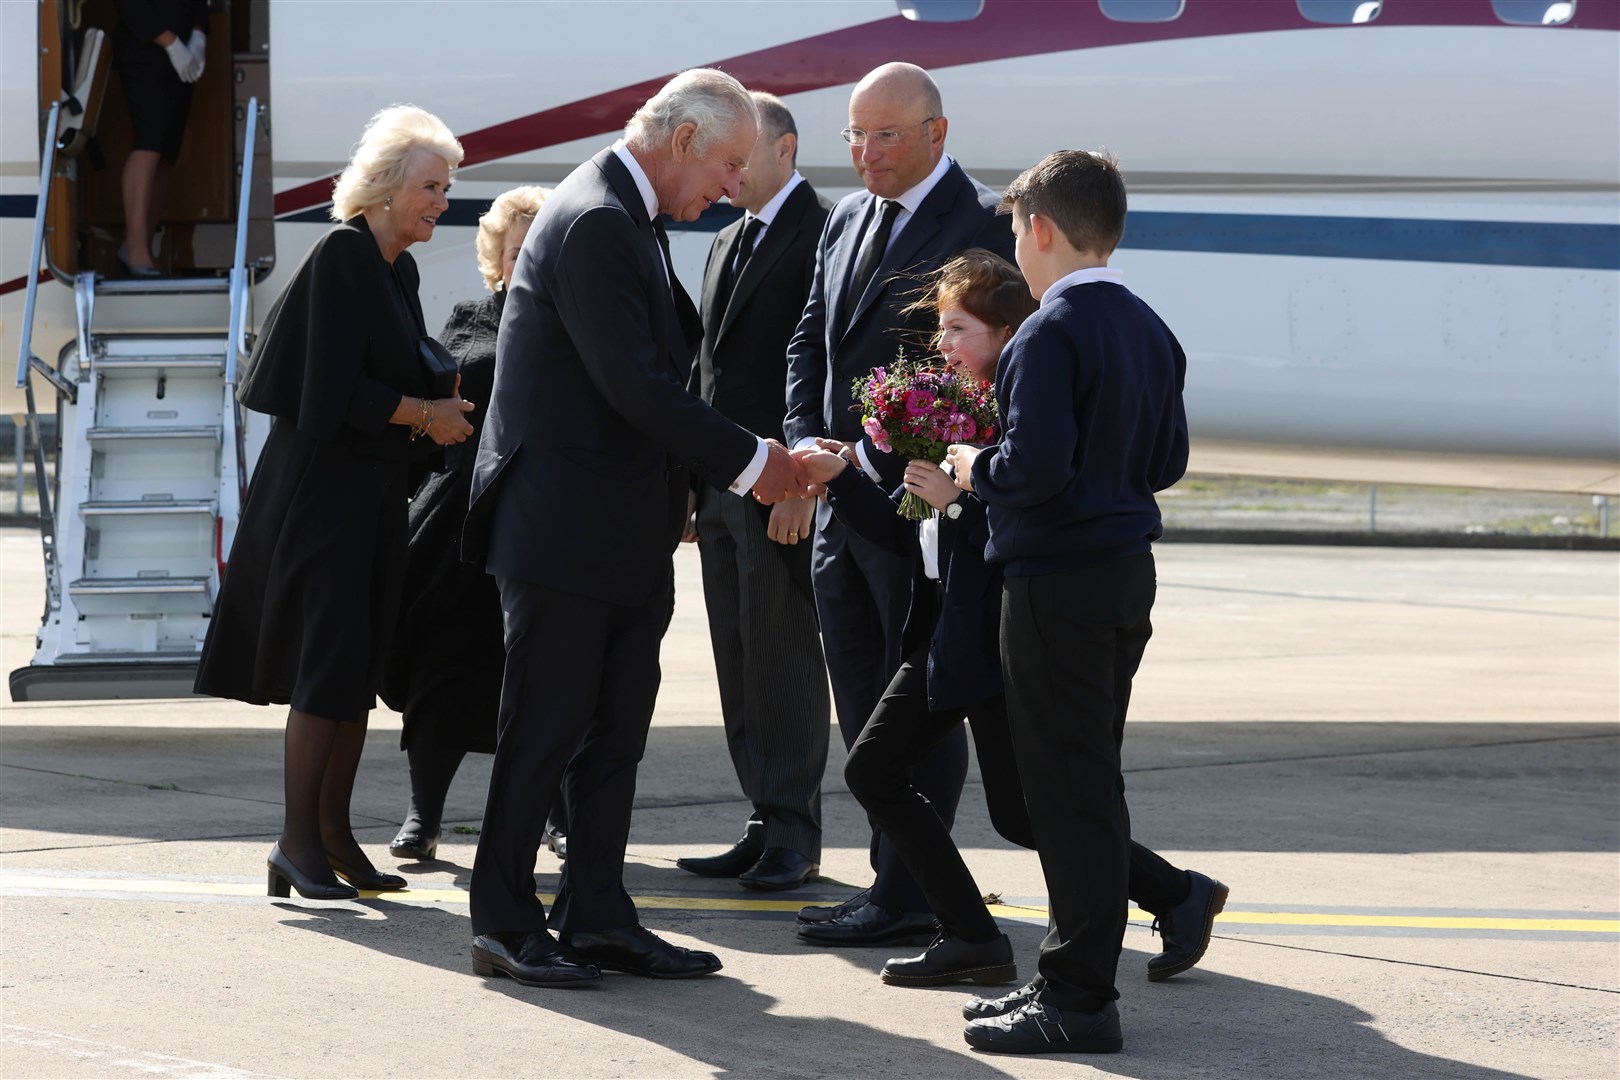 The Queen Consort and King Charles III are greeted at Belfast City Airport (Liam McBurney/PA)